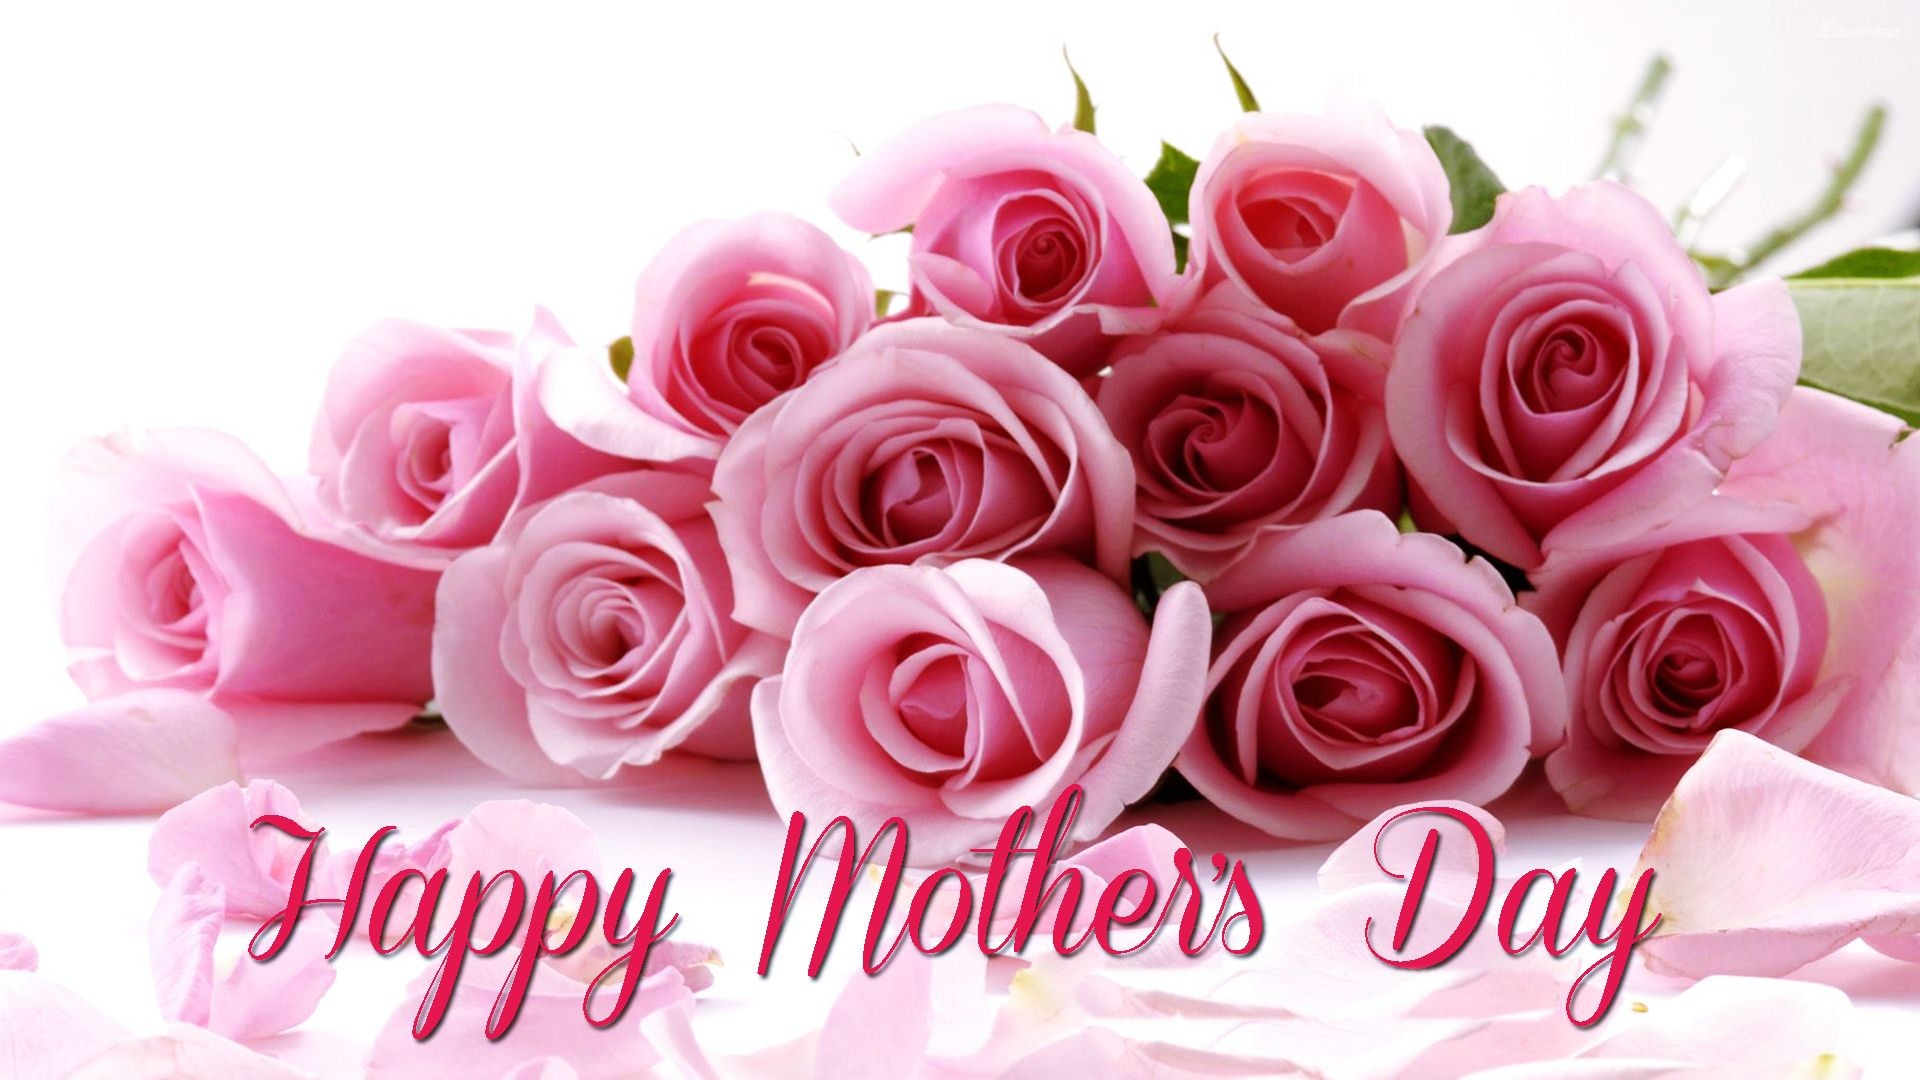 Mothers Day Wallpaper Images - Happy Mothers Day 2018 - HD Wallpaper 